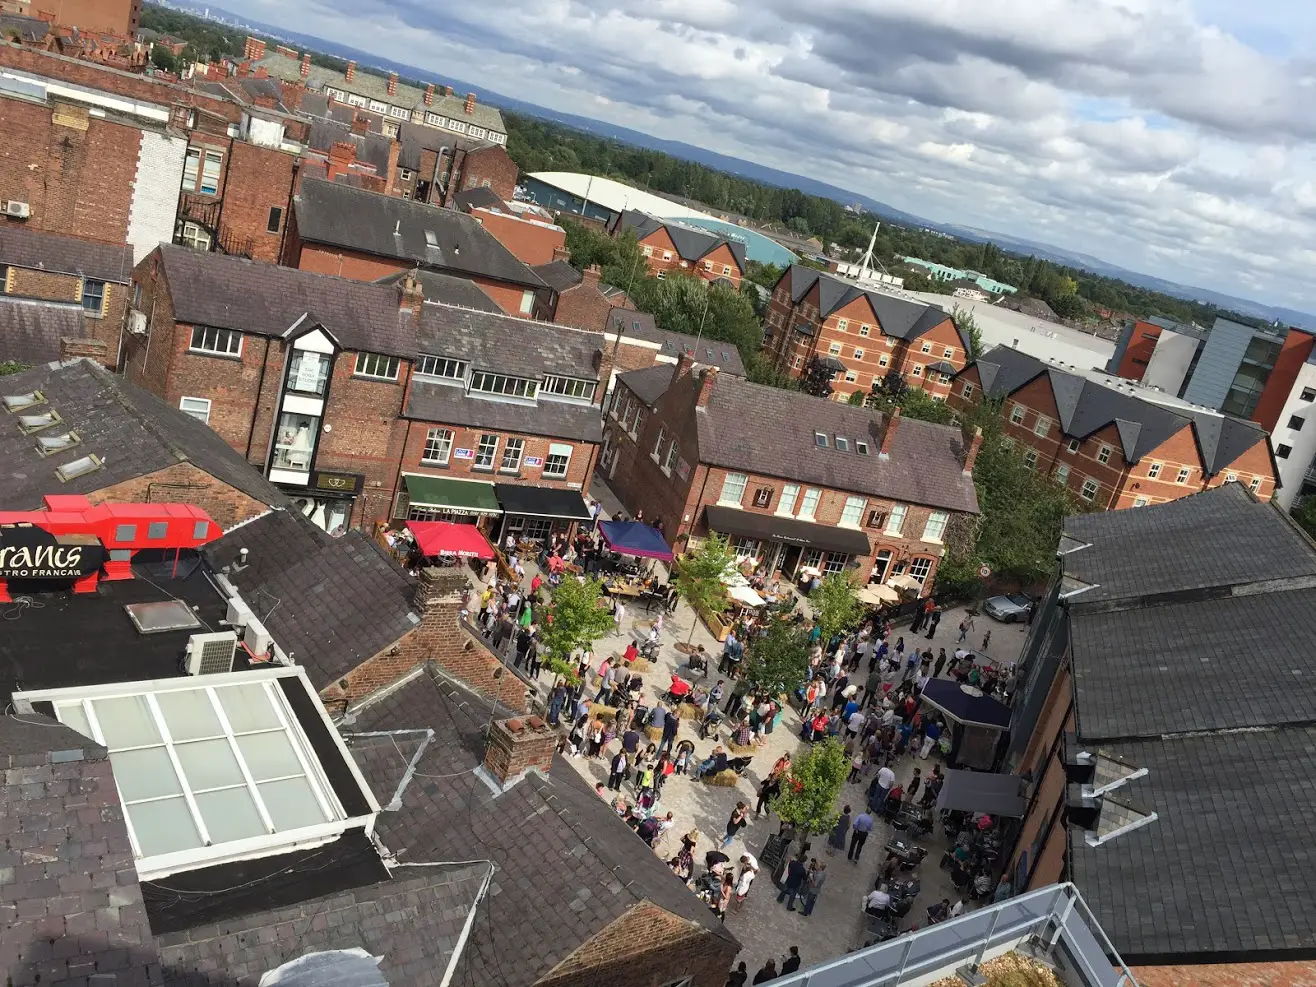 Last year's Goose Green Summer Festival as seen from the roof of Altrincham Hospital